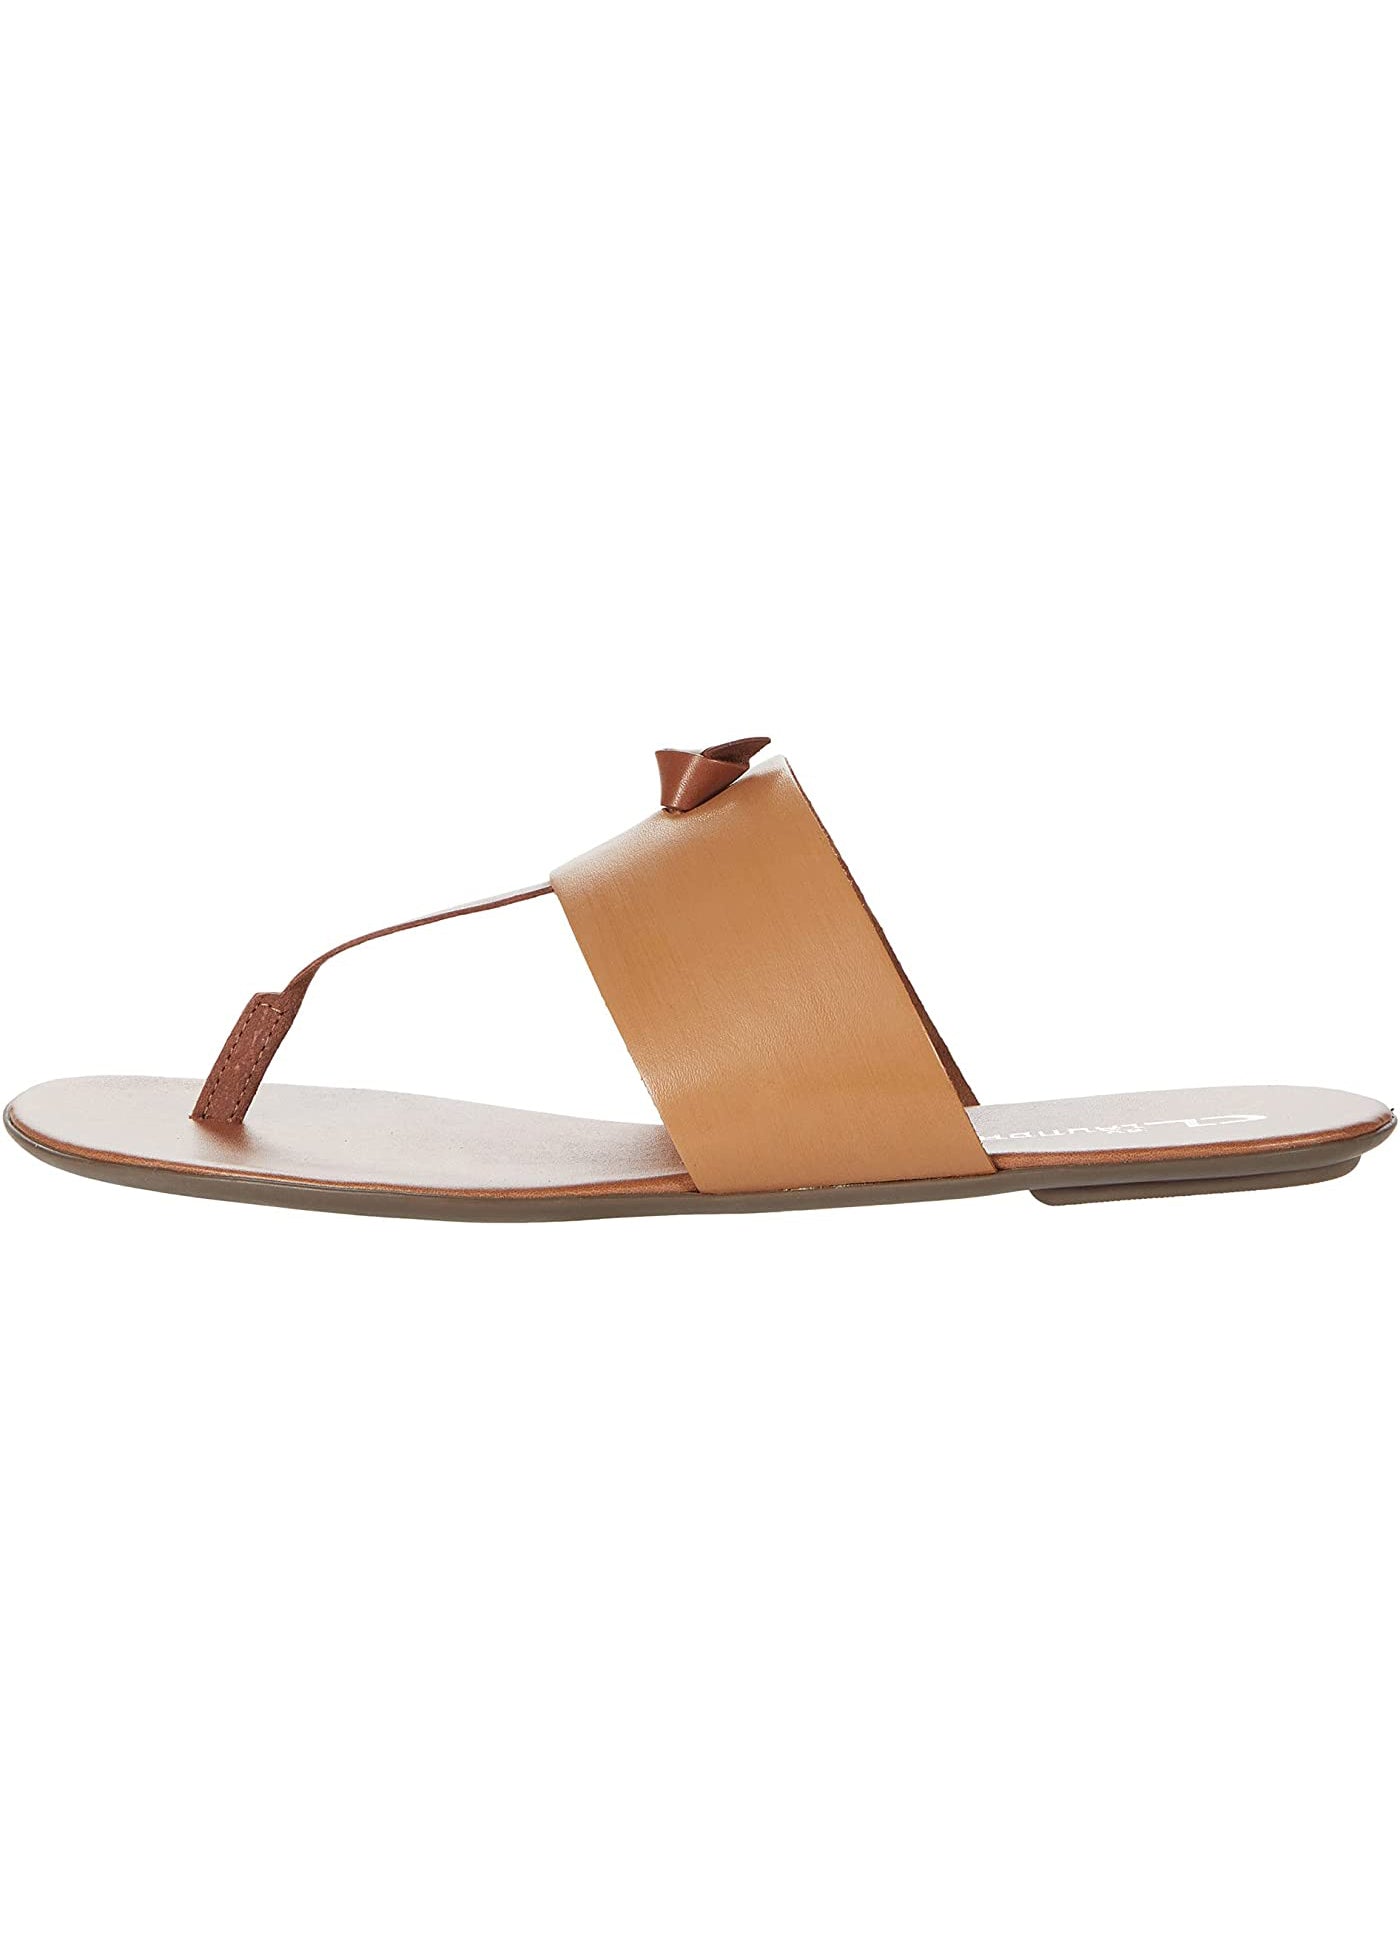 CL by Chinese Laundry Natural Admire Leather Sandals - FINAL SALE Accessories